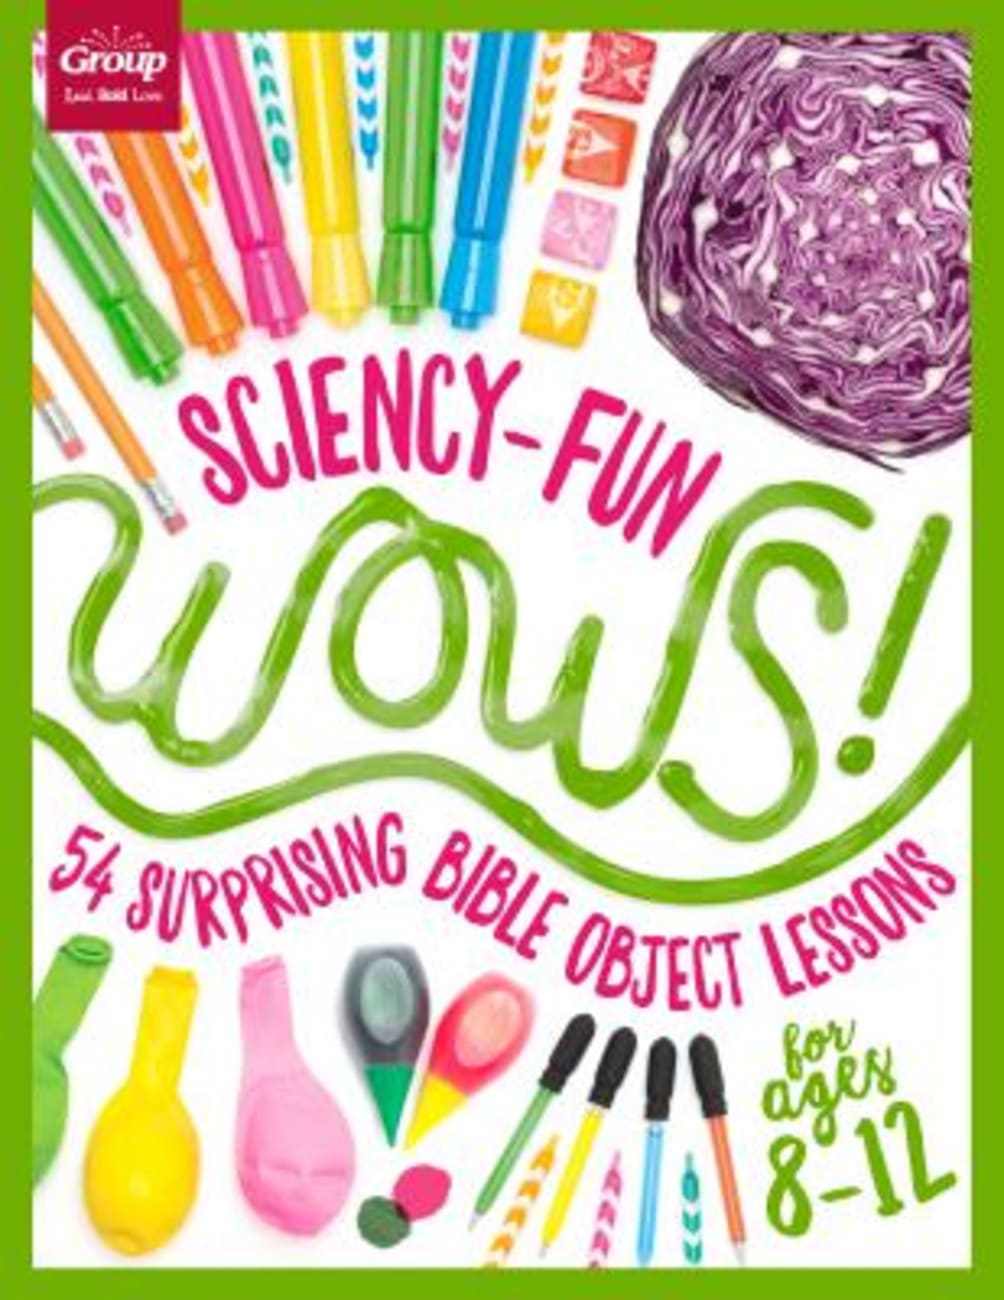 Sciency-Fun Wows!: 54 Surprising Bible Object Lessons (For Ages 8-12) Paperback